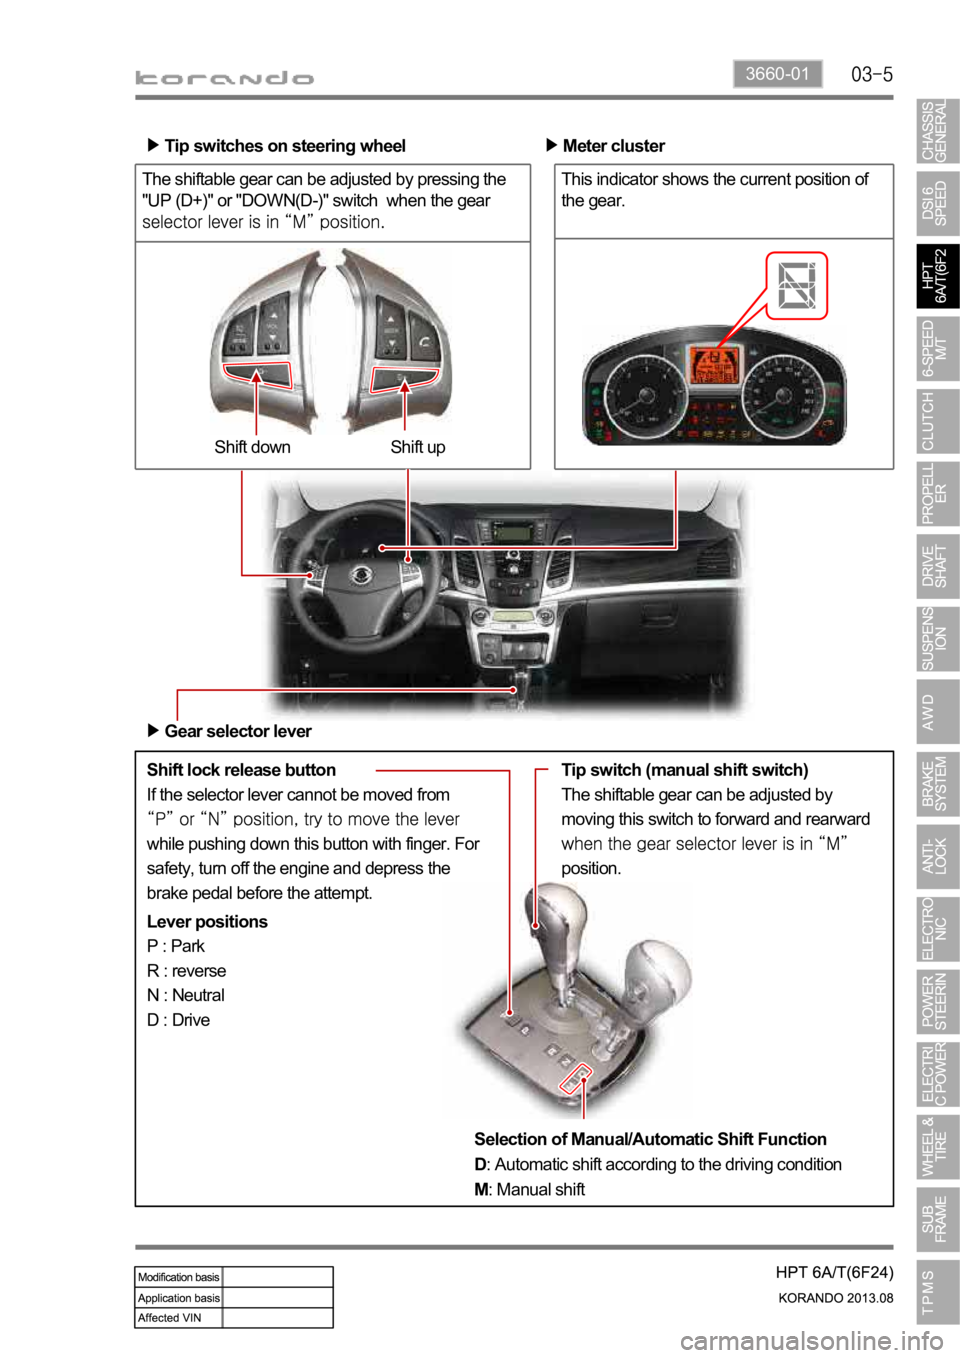 SSANGYONG KORANDO 2013 Workshop Manual 3660-01
The shiftable gear can be adjusted by pressing the 
"UP (D+)" or "DOWN(D-)" switch  when the gear 
Shift lock release button
If the selector lever cannot be moved from 
while p